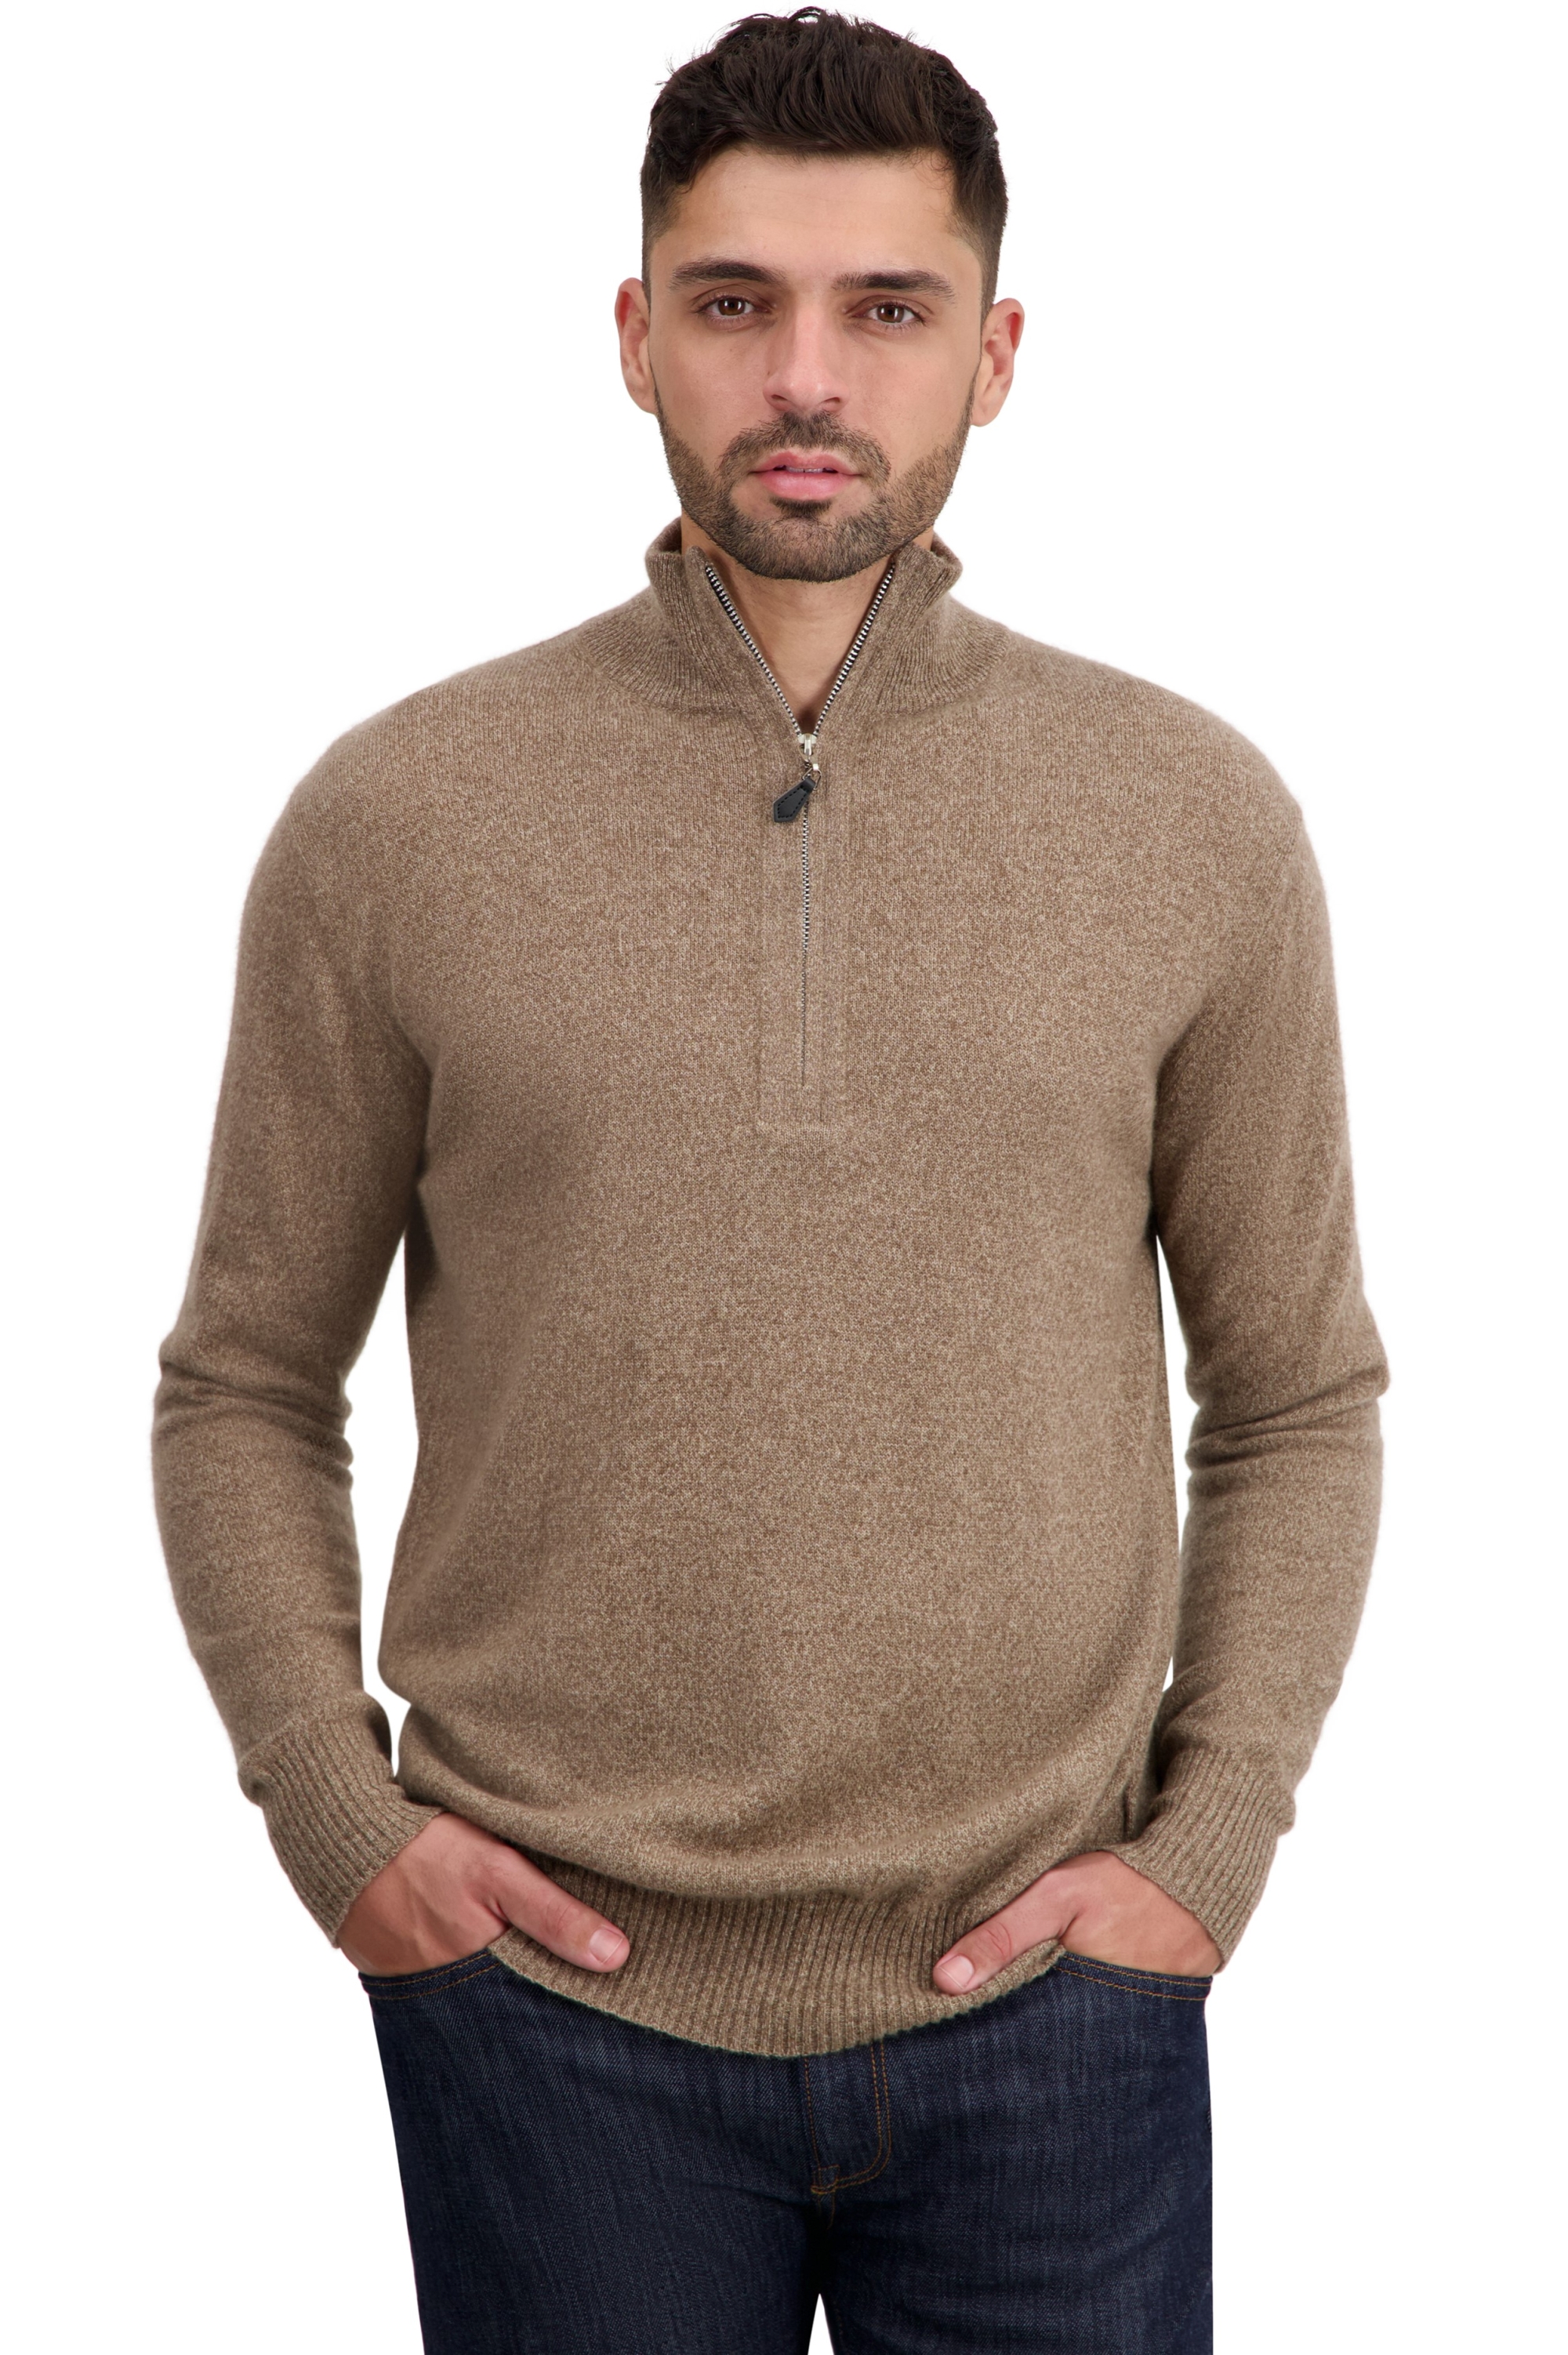 Cashmere men basic sweaters at low prices toulon first tan marl l